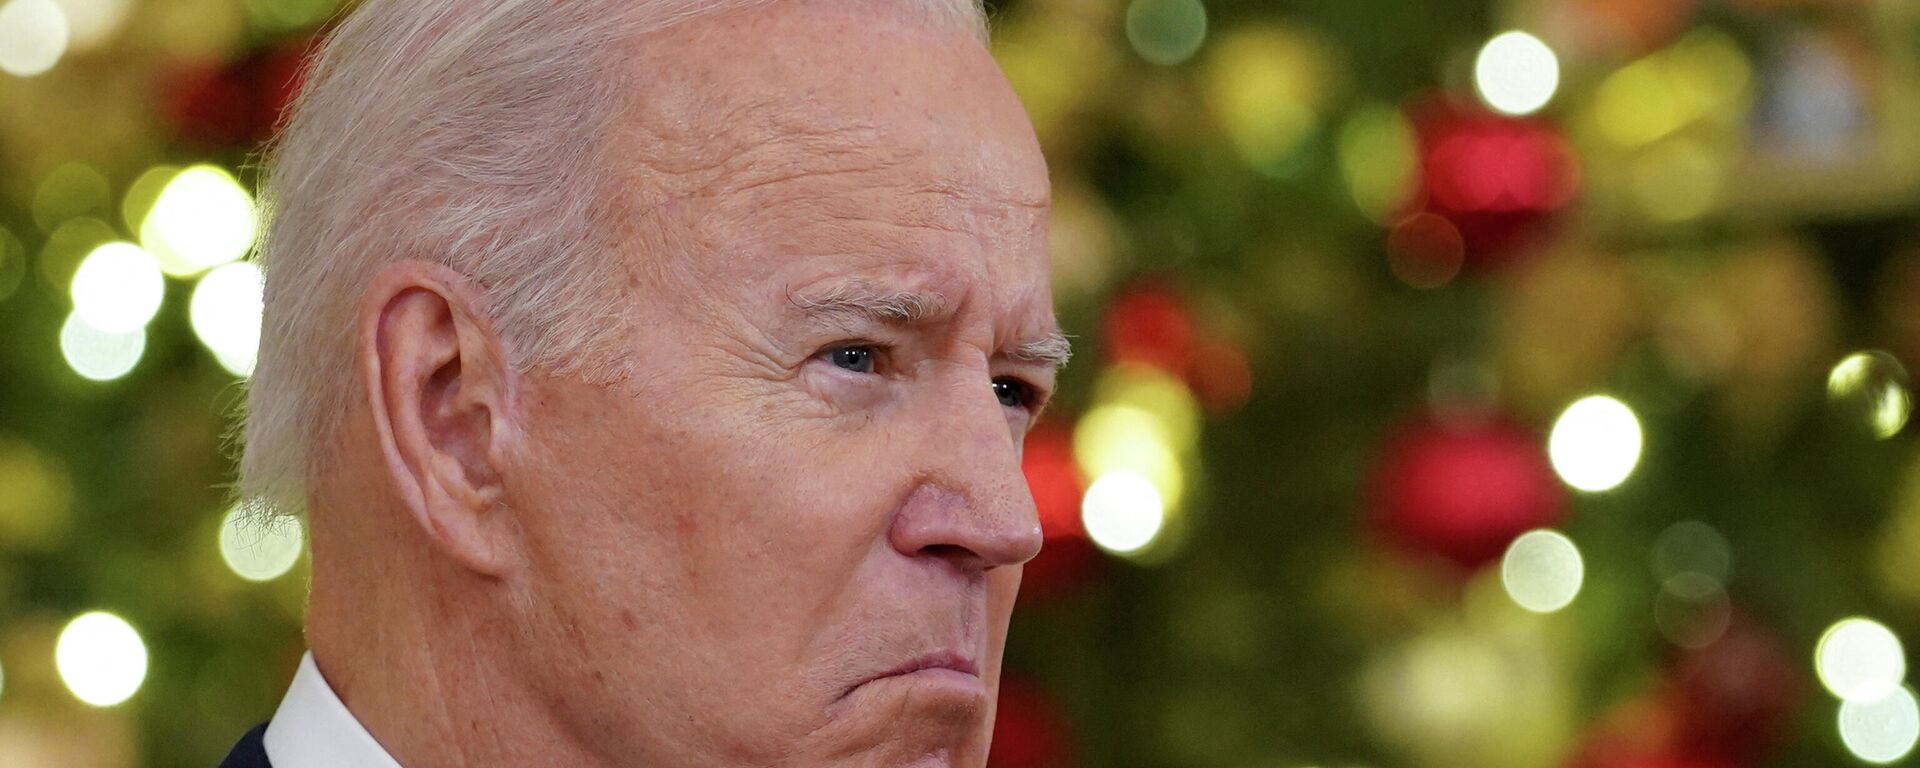 U.S. President Joe Biden reacts as he speaks about the country's fight against the coronavirus disease (COVID-19) at the White House in Washington, U.S., December 21, 2021. REUTERS/Kevin Lamarque - Sputnik International, 1920, 31.12.2021